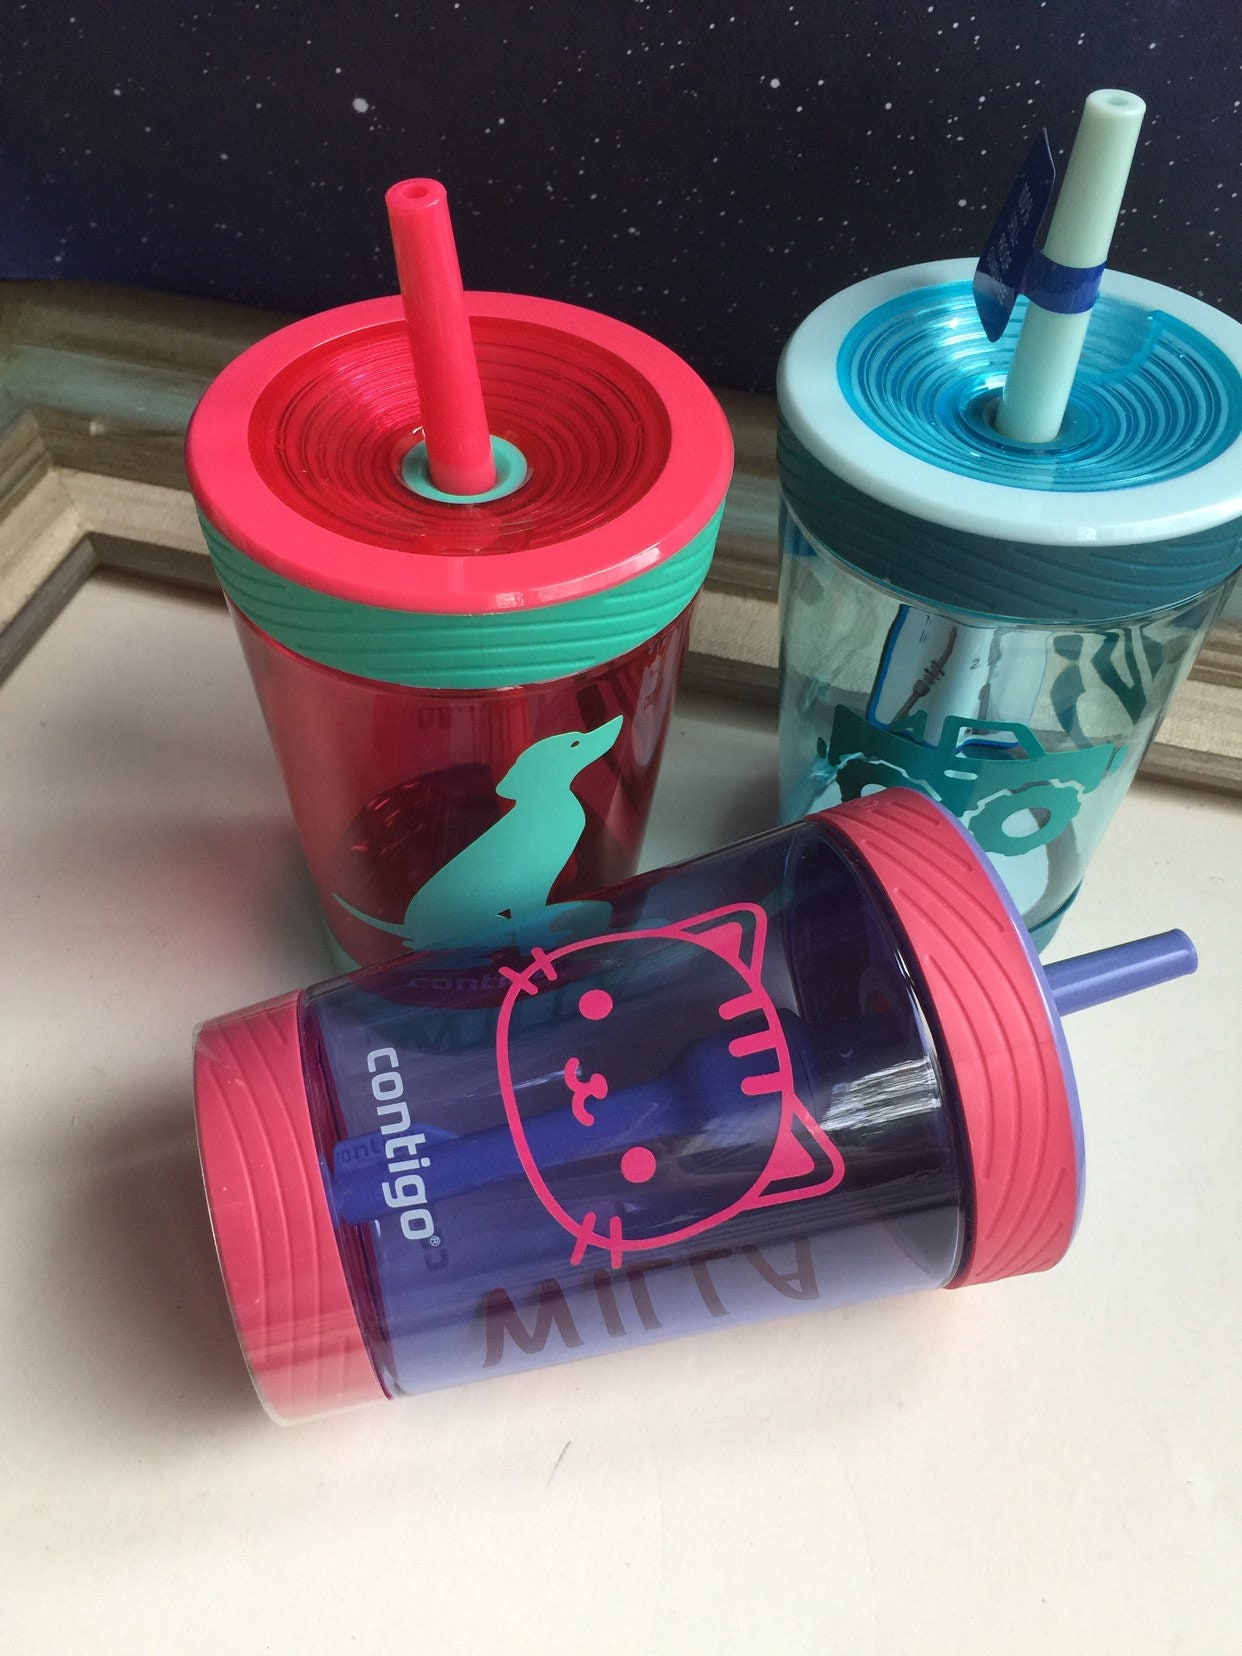 Personalized Contigo Cups Kids Cups Kids Gifts 